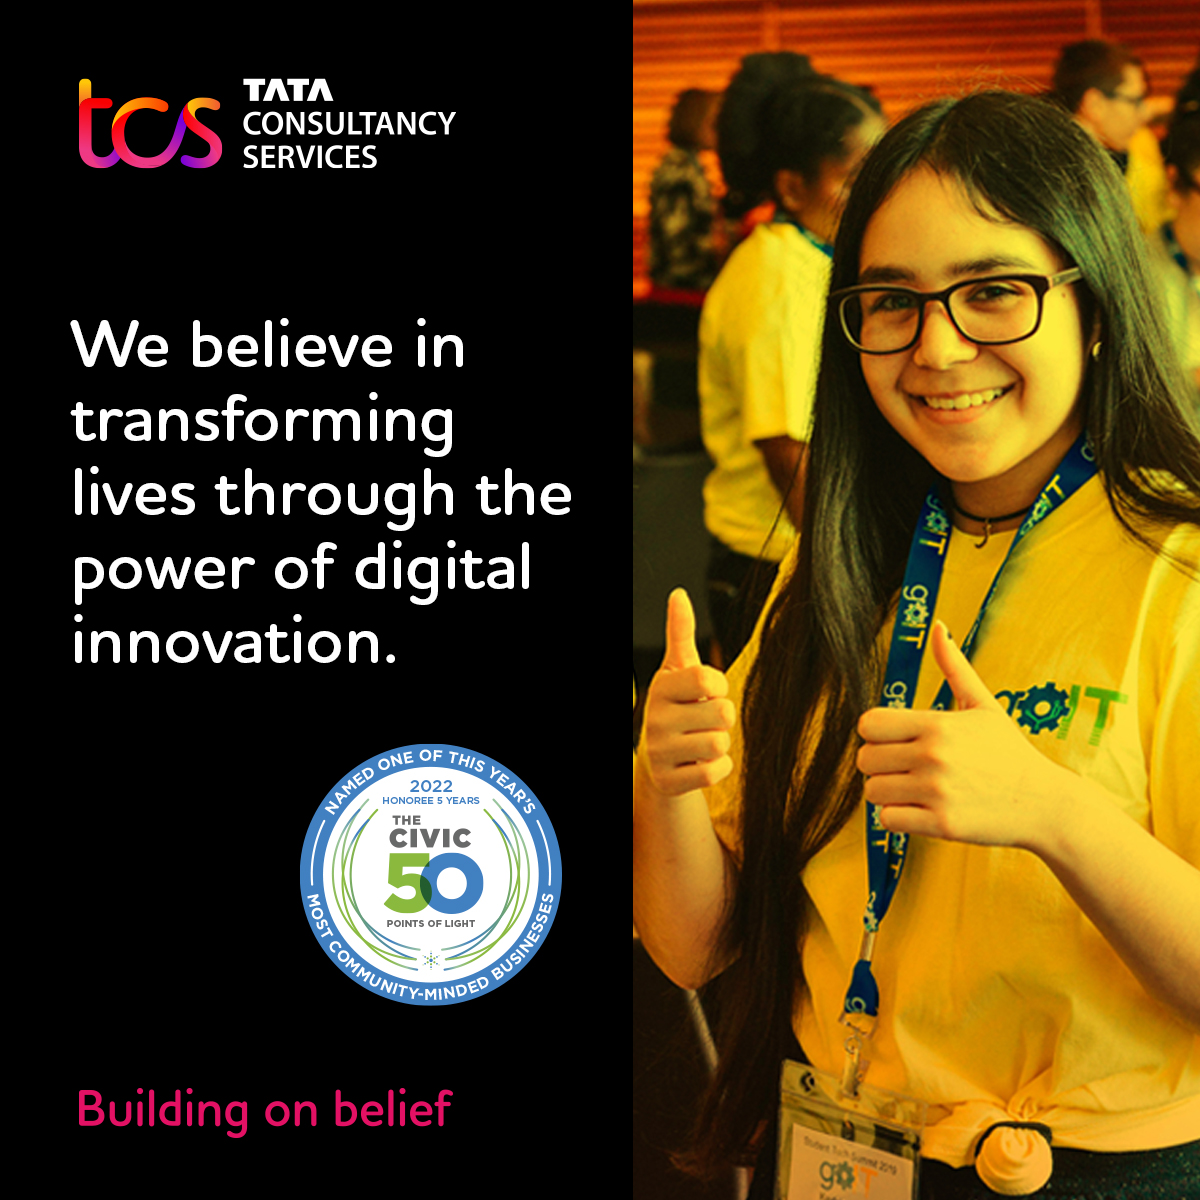 Purpose + Passion = Positive Change. We’re humbled and honored to be named one of America’s 50 most community-minded companies by @PointsofLight. Learn more about our community investment initiatives: tcs.com/csr #TheCivic50 #TCSEmpowers #BuildingonBelief